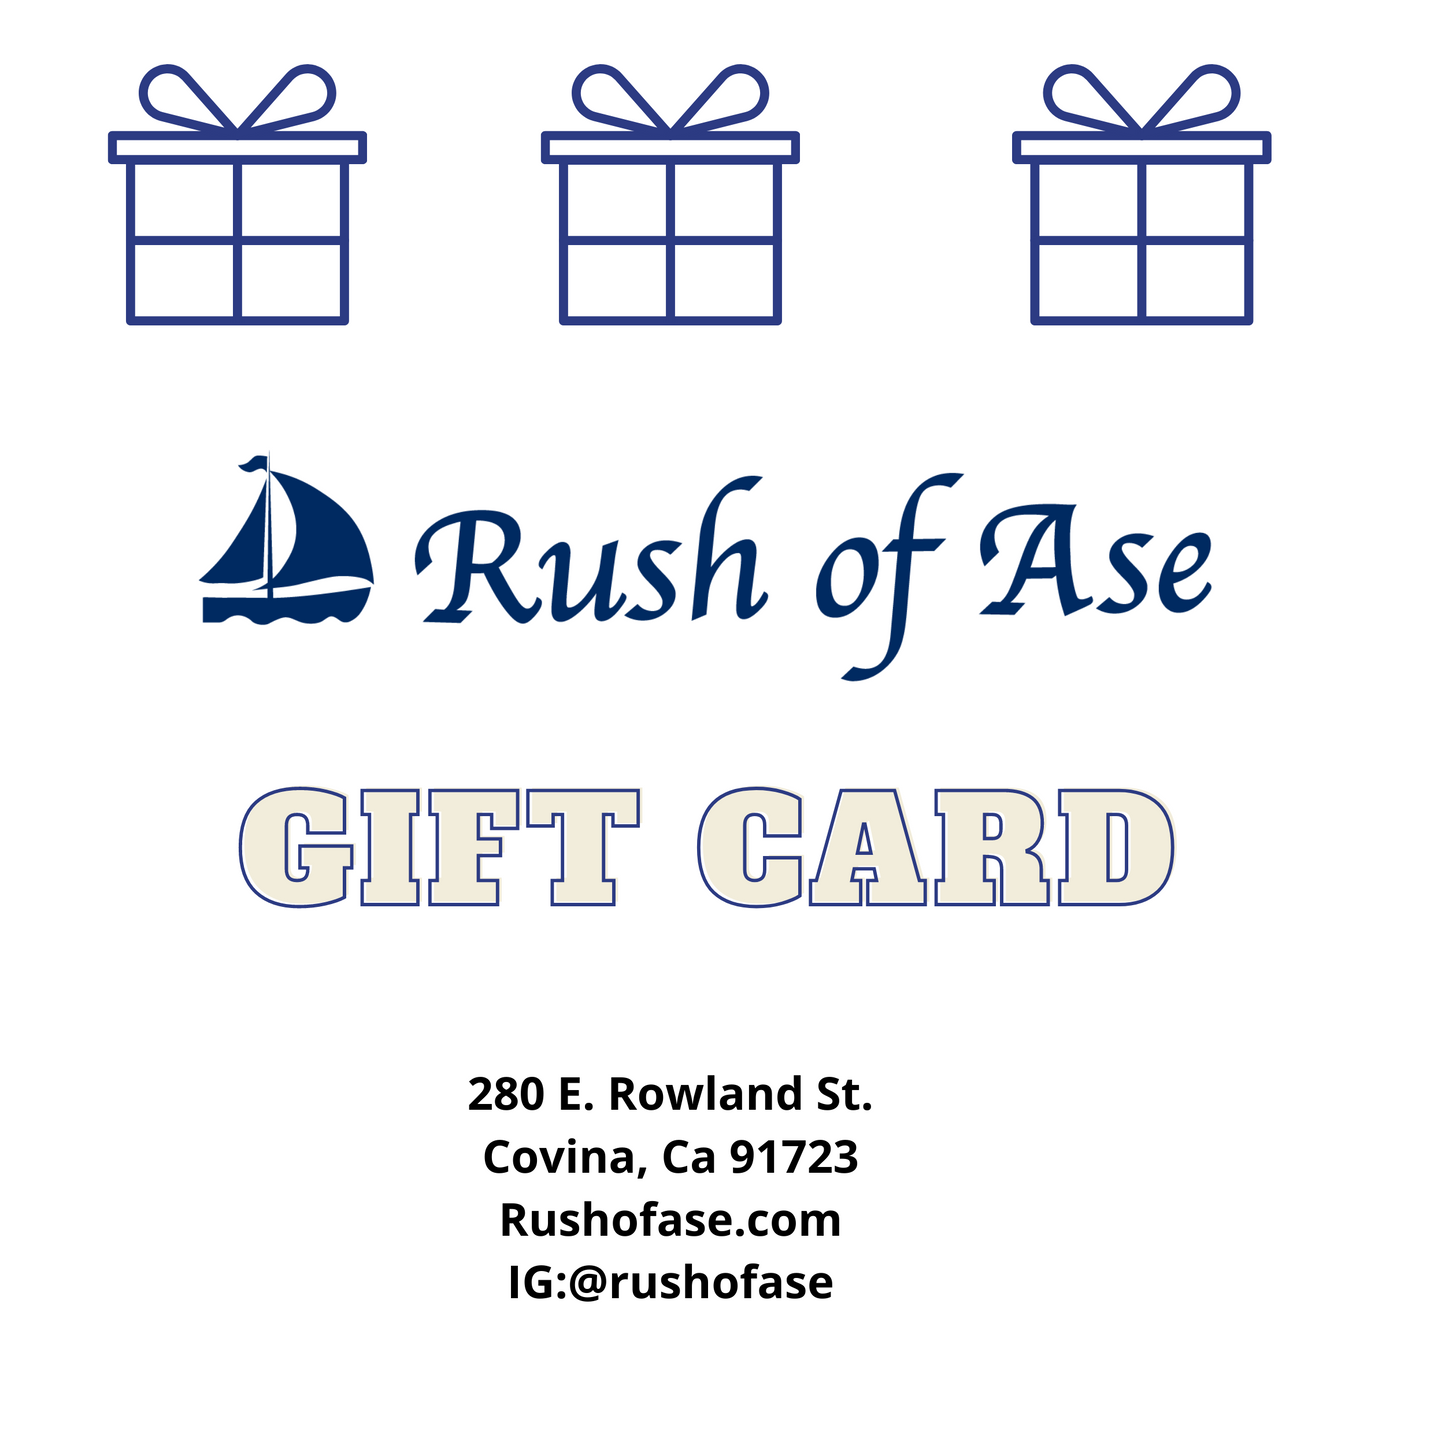 Rush of Ase Gift Card